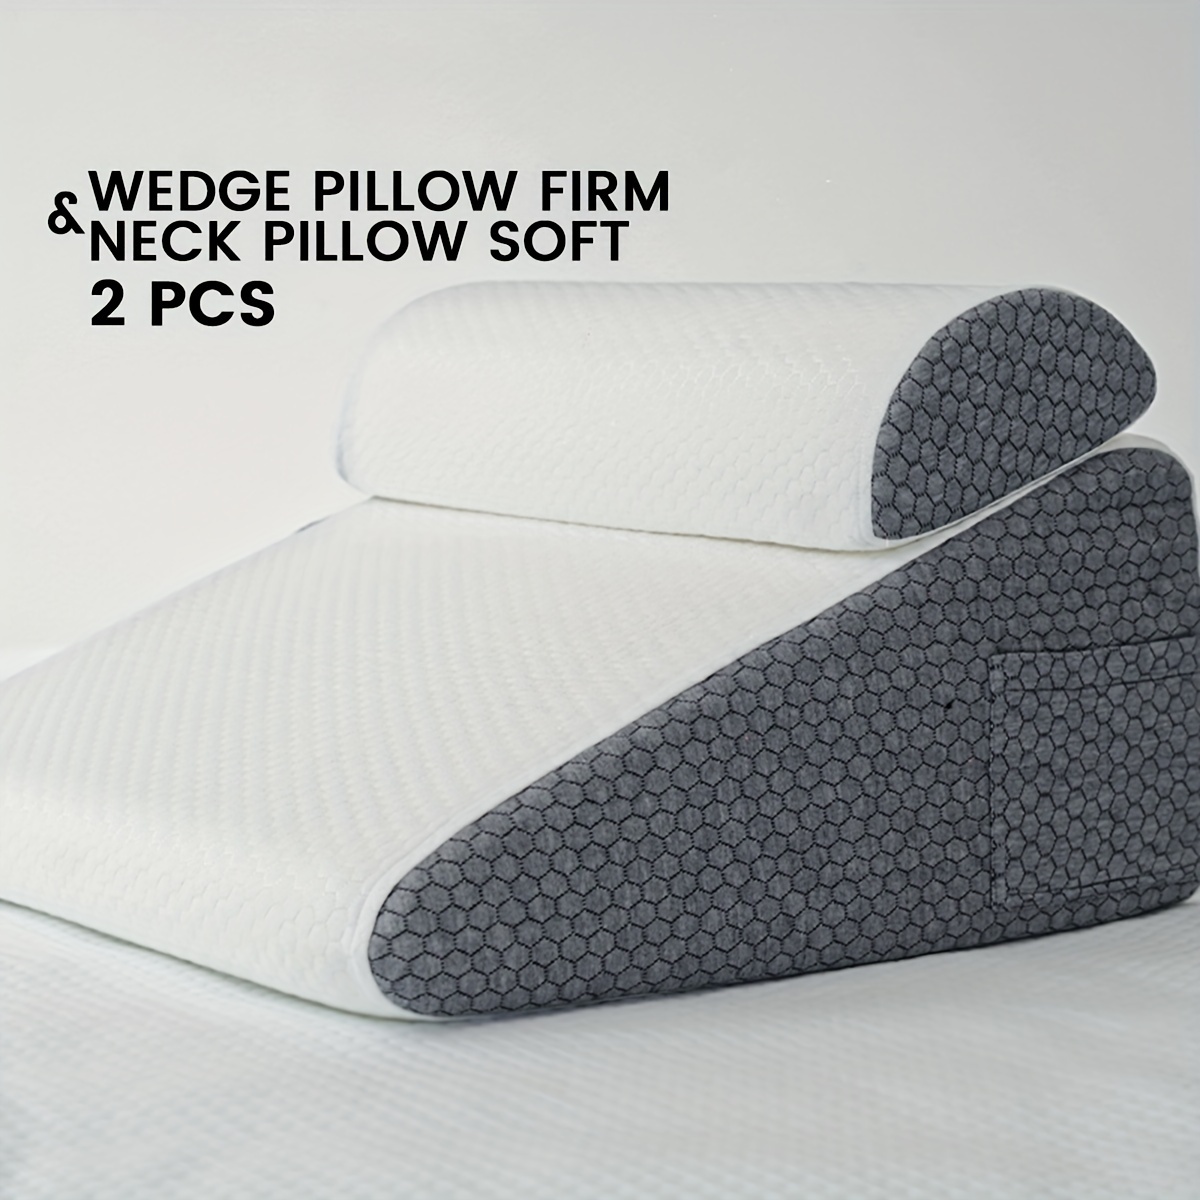 aeris Bed Wedge Pillow for Sleeping - Memory Foam - Unique Curved